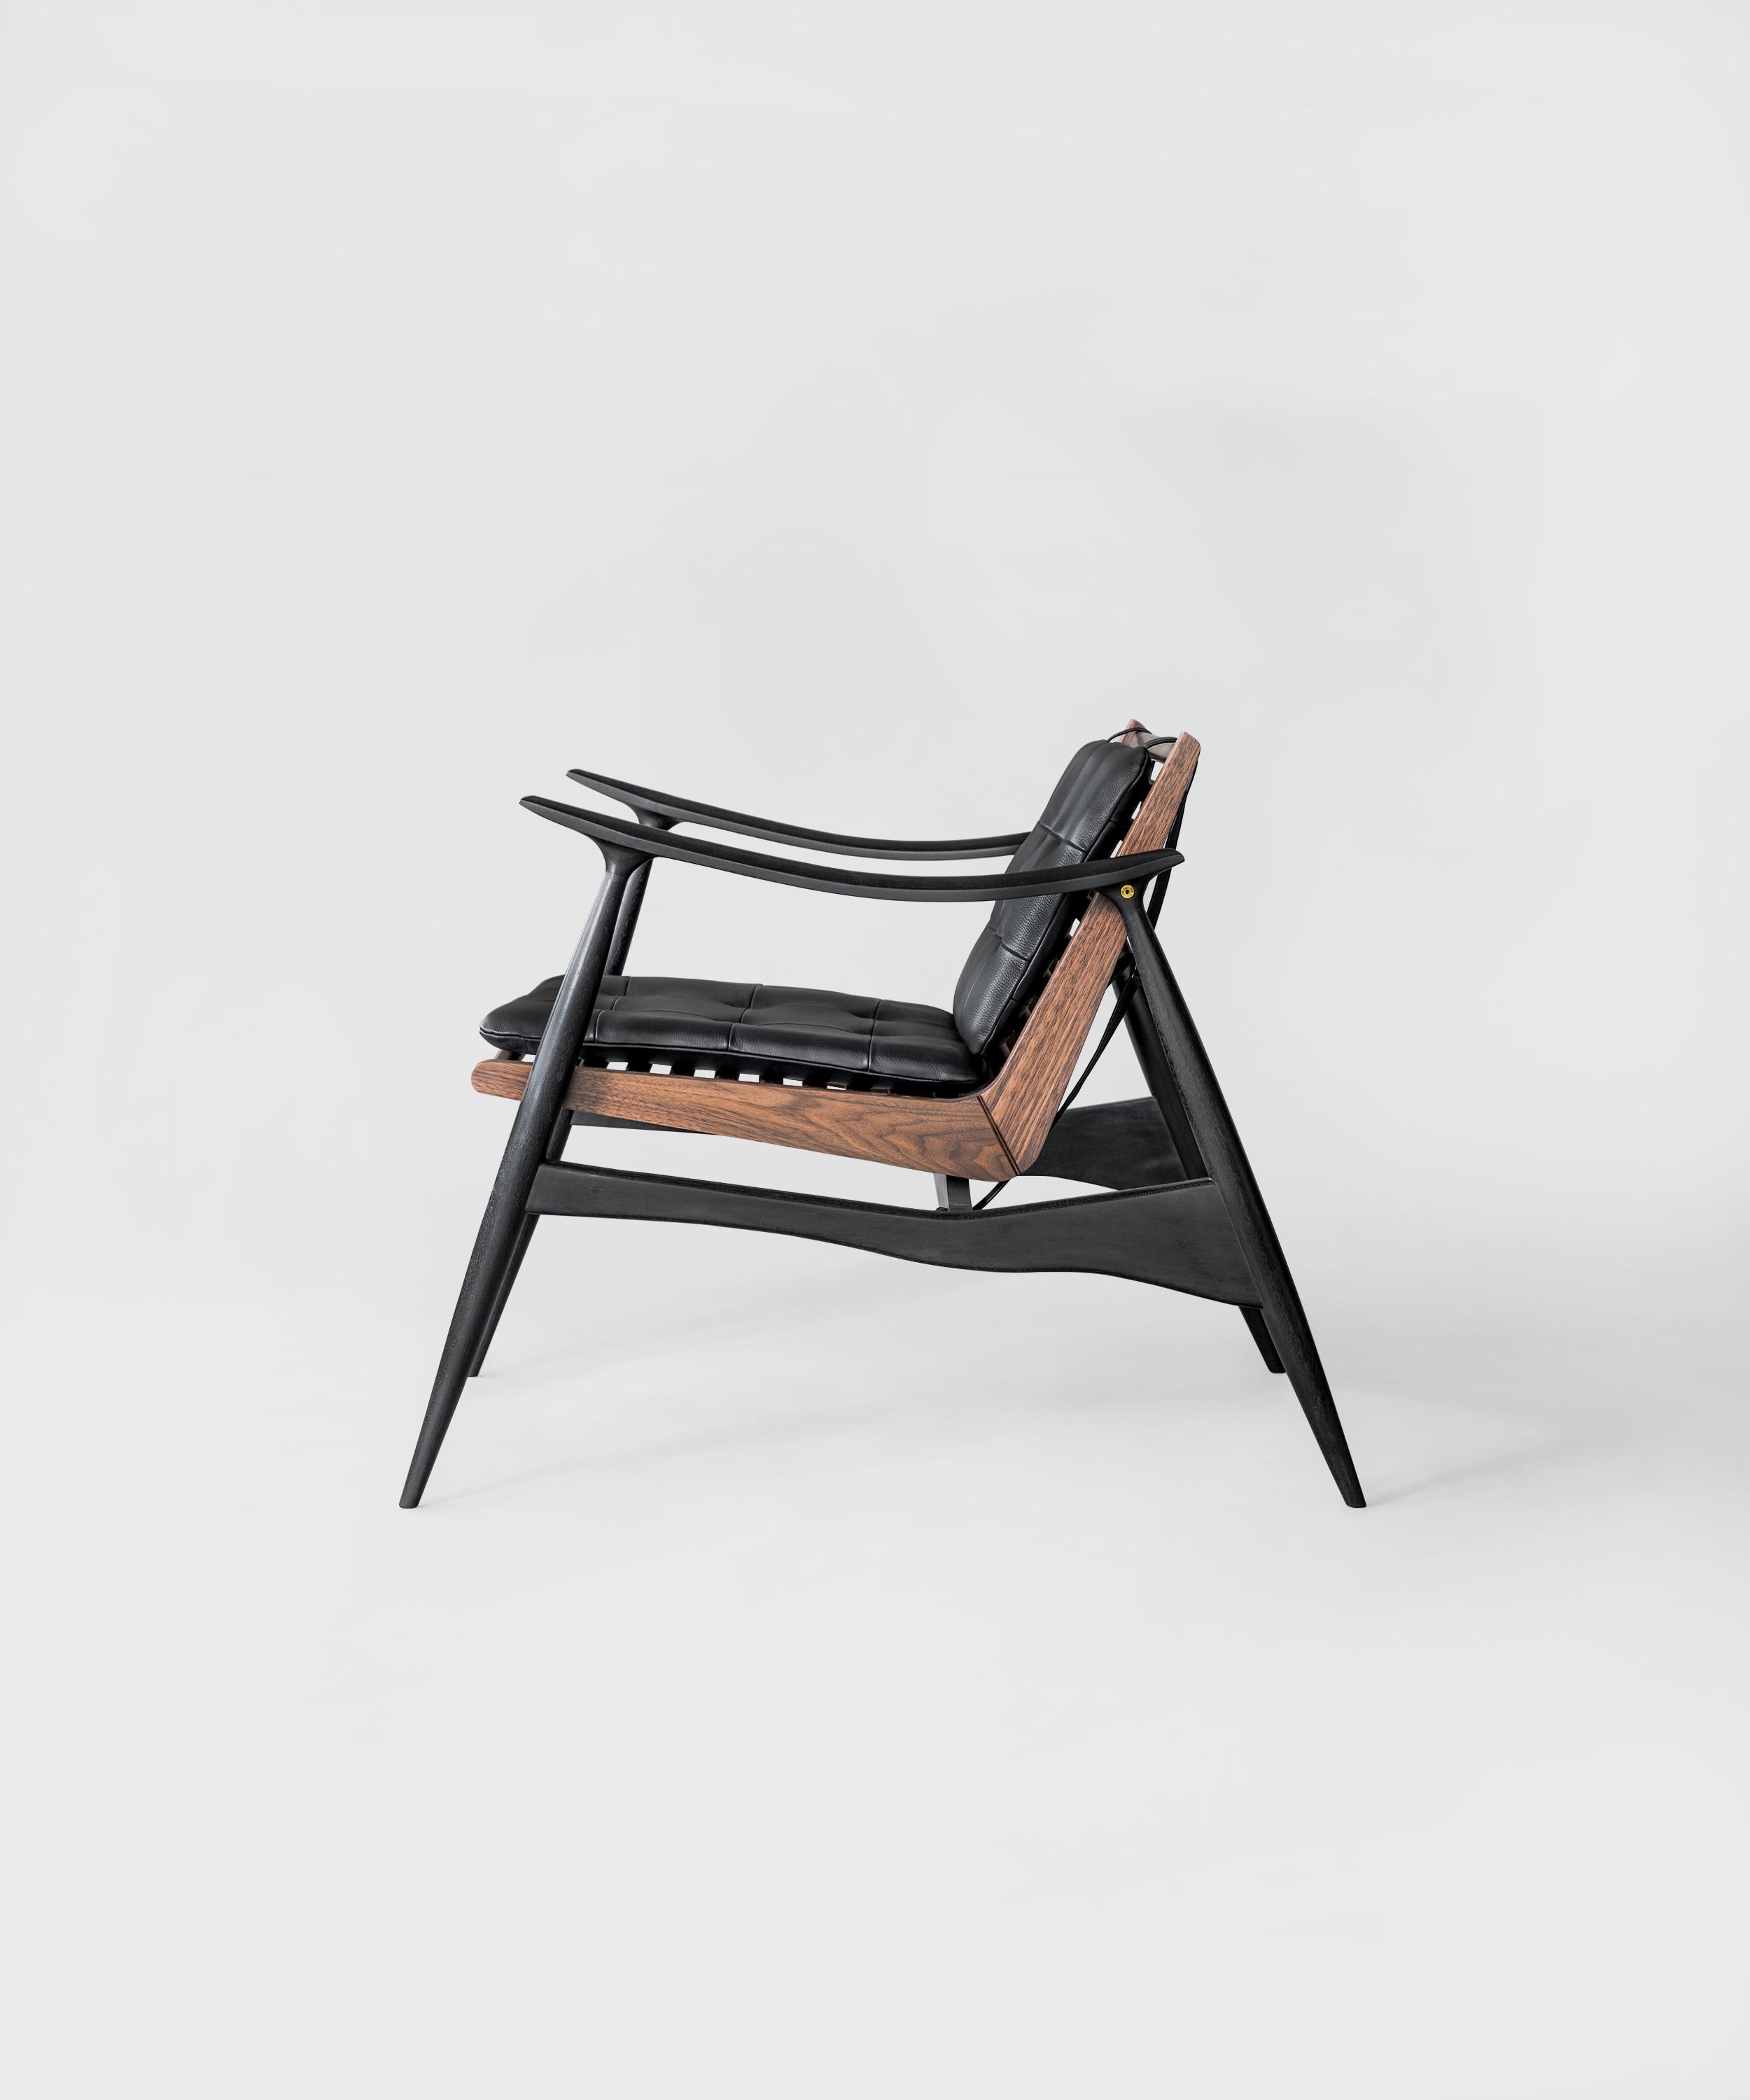 Other Atra Lounge Chair by Atra Design